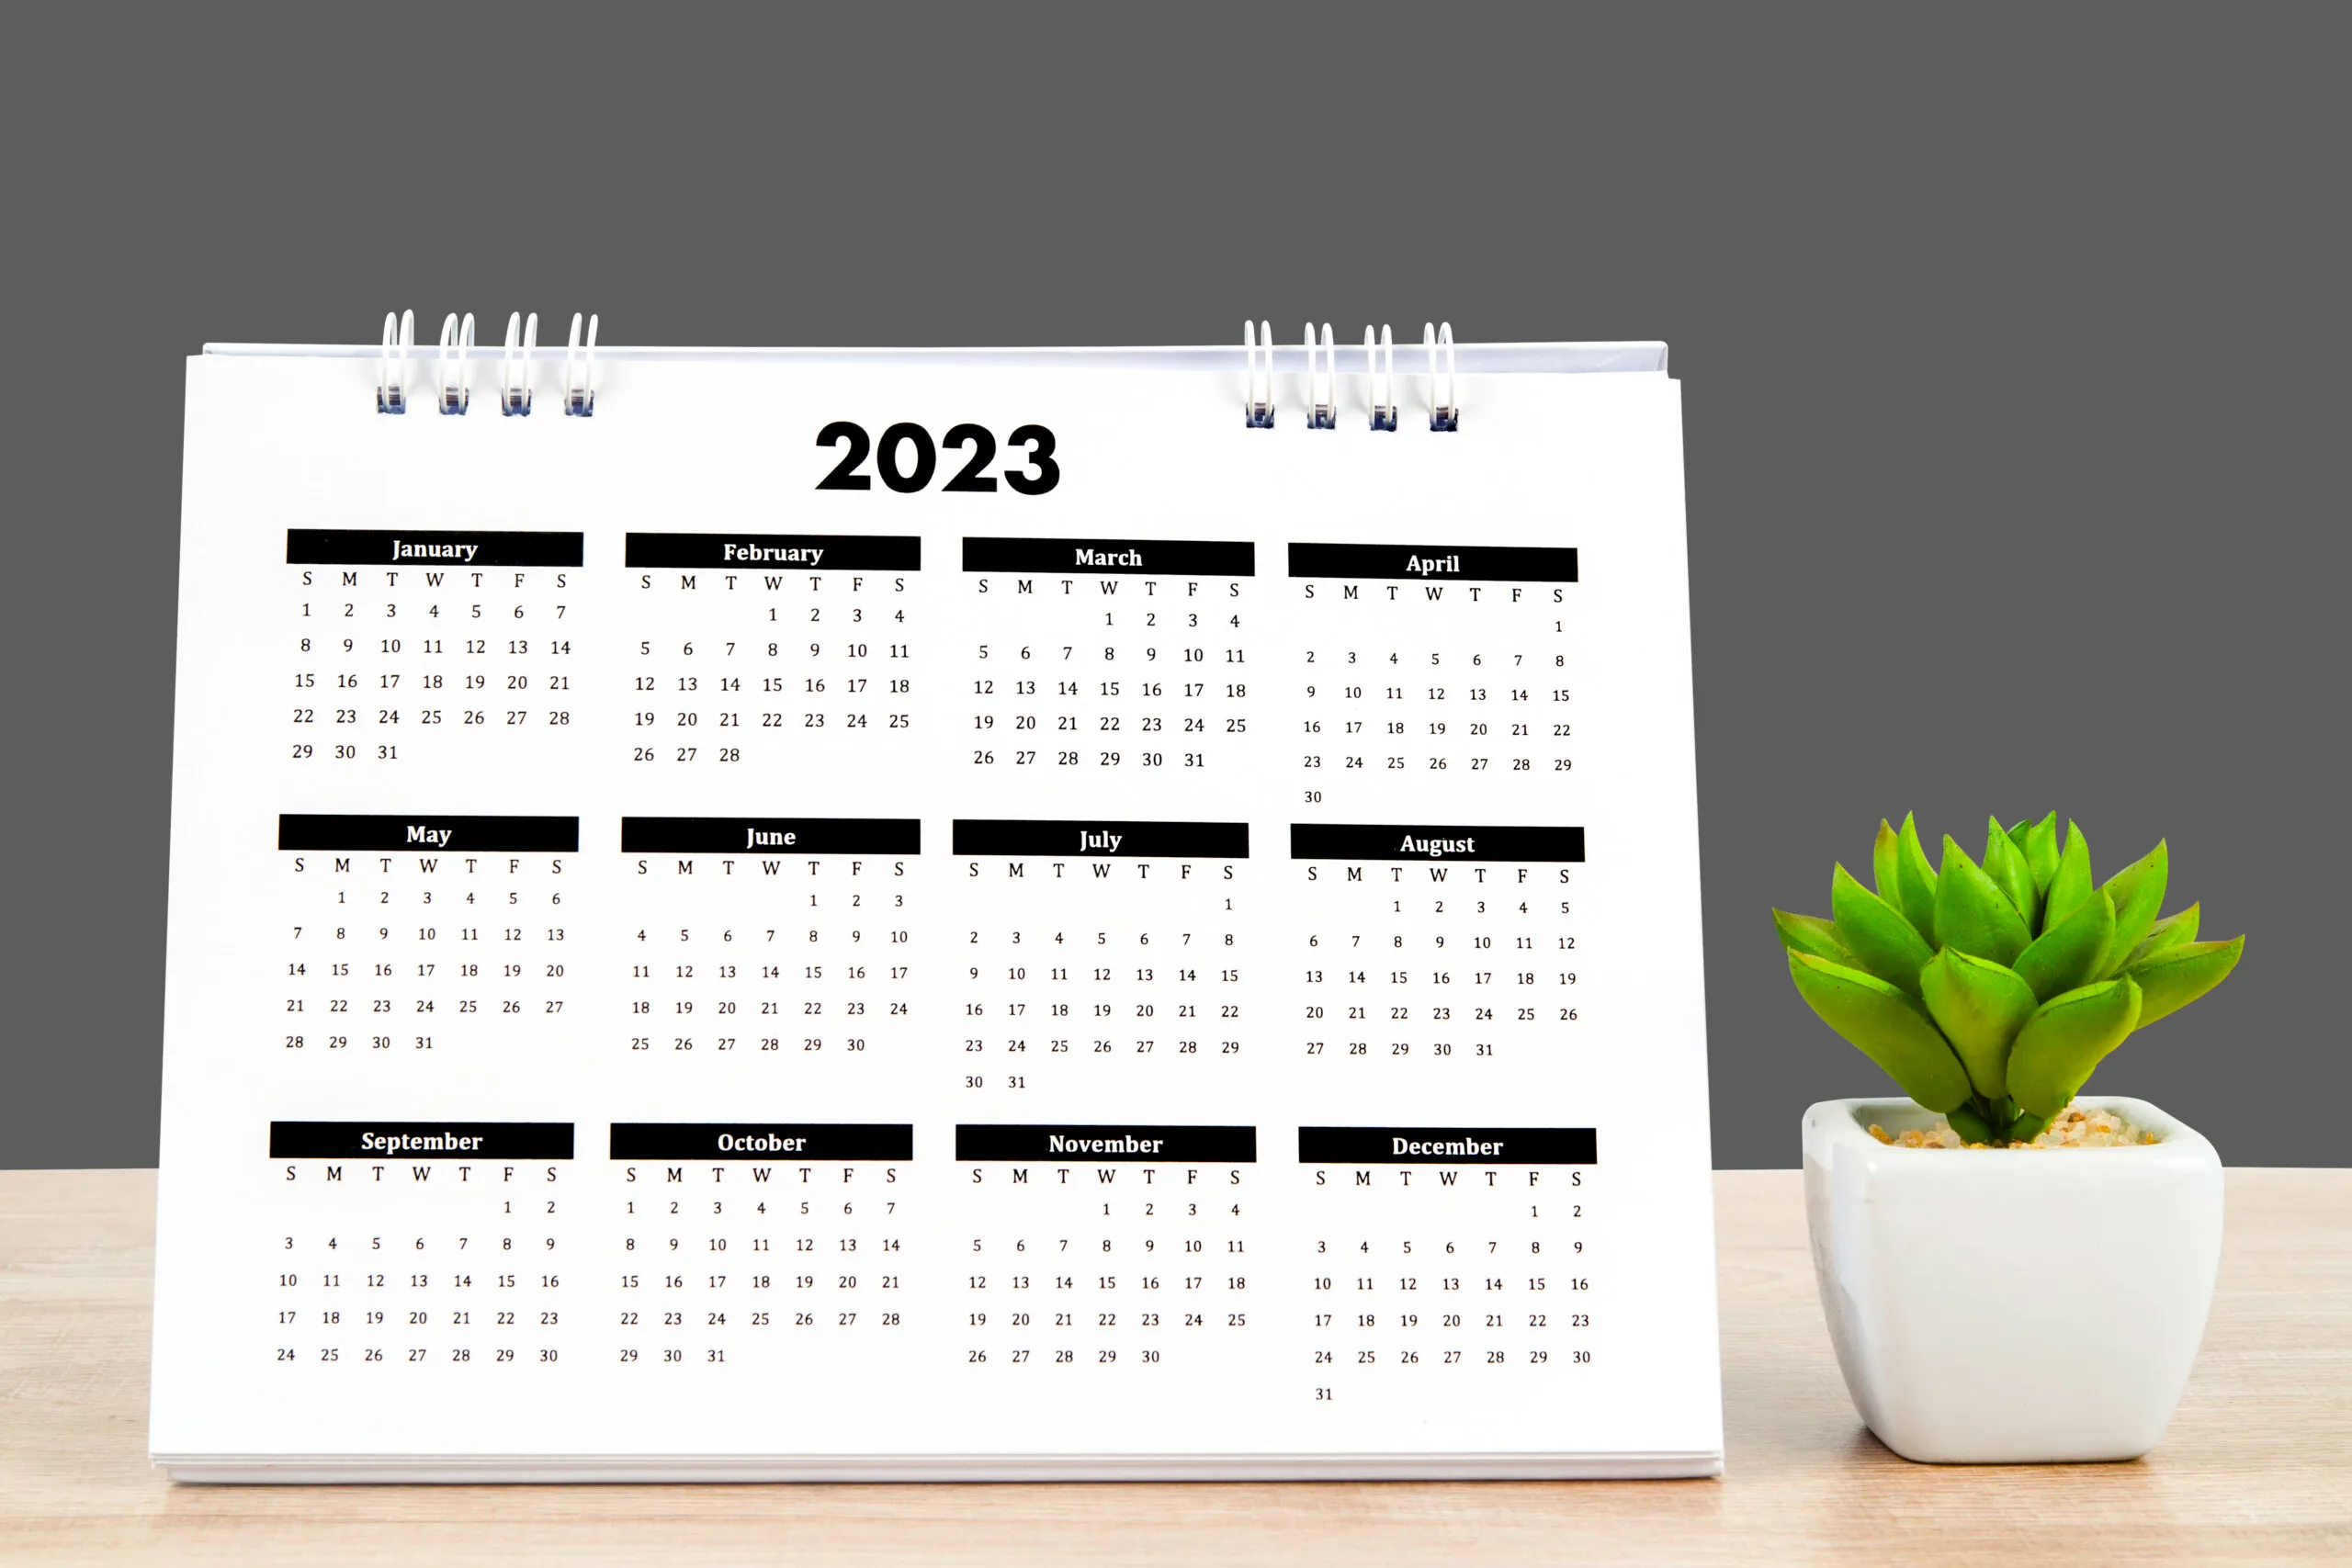 Calendar desk 2023, Calendar planning and houseplant on wooden table with dark gray background, clipping path.